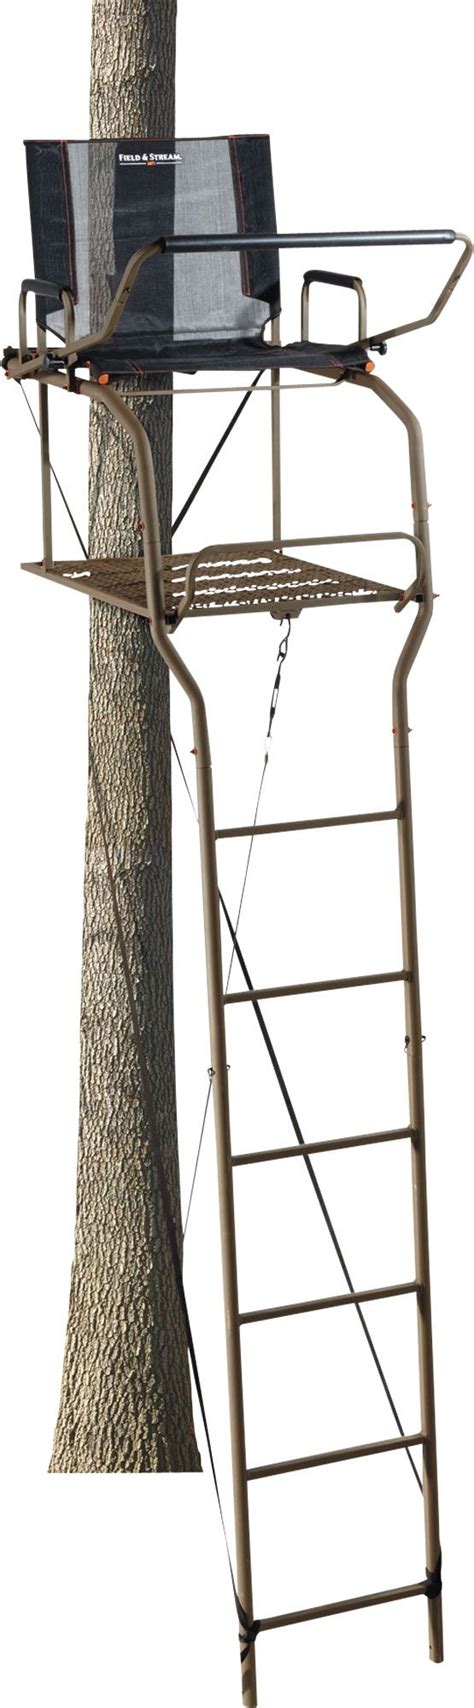 Field And Stream Altitude 24 Ladder Stand Ladder Stands Holiday T